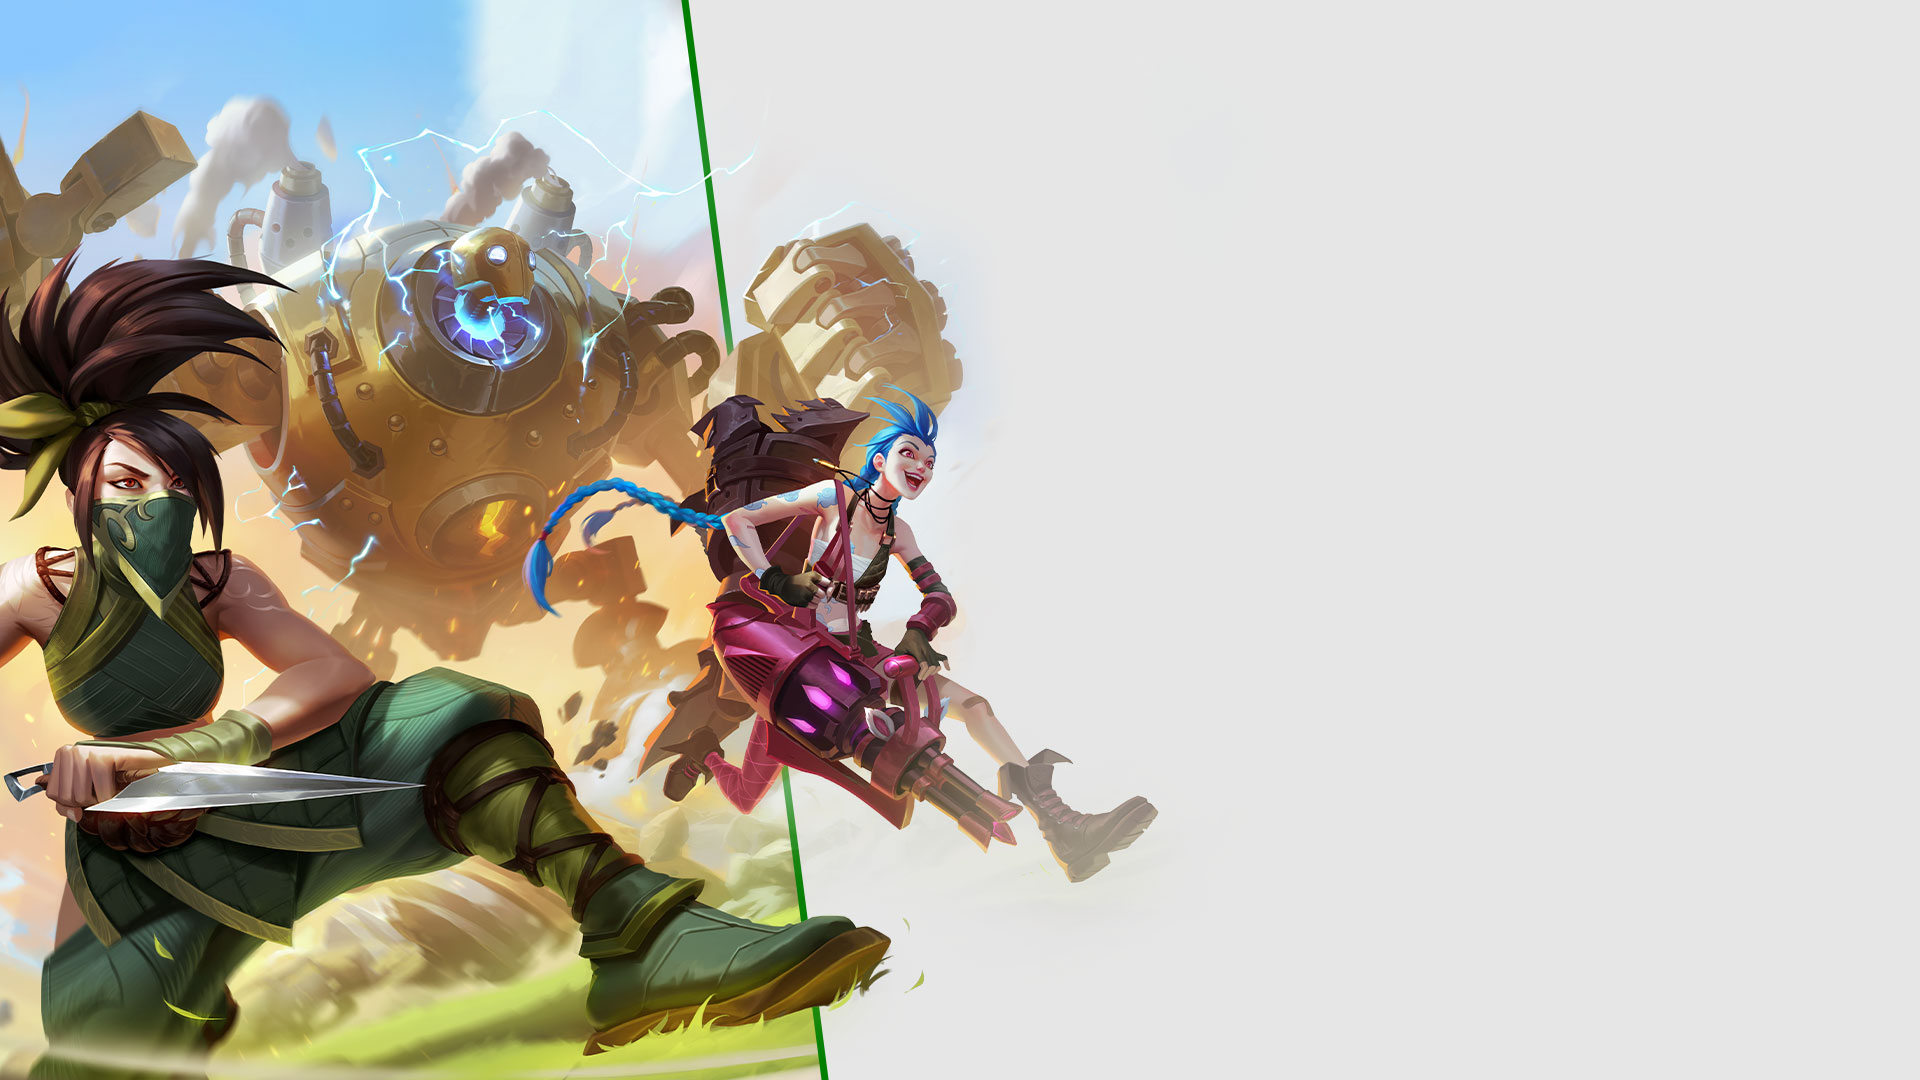 League of Legends: Wild Rift, a team of champions sprints across the battlefield to claim victory as they go up against enemy players.